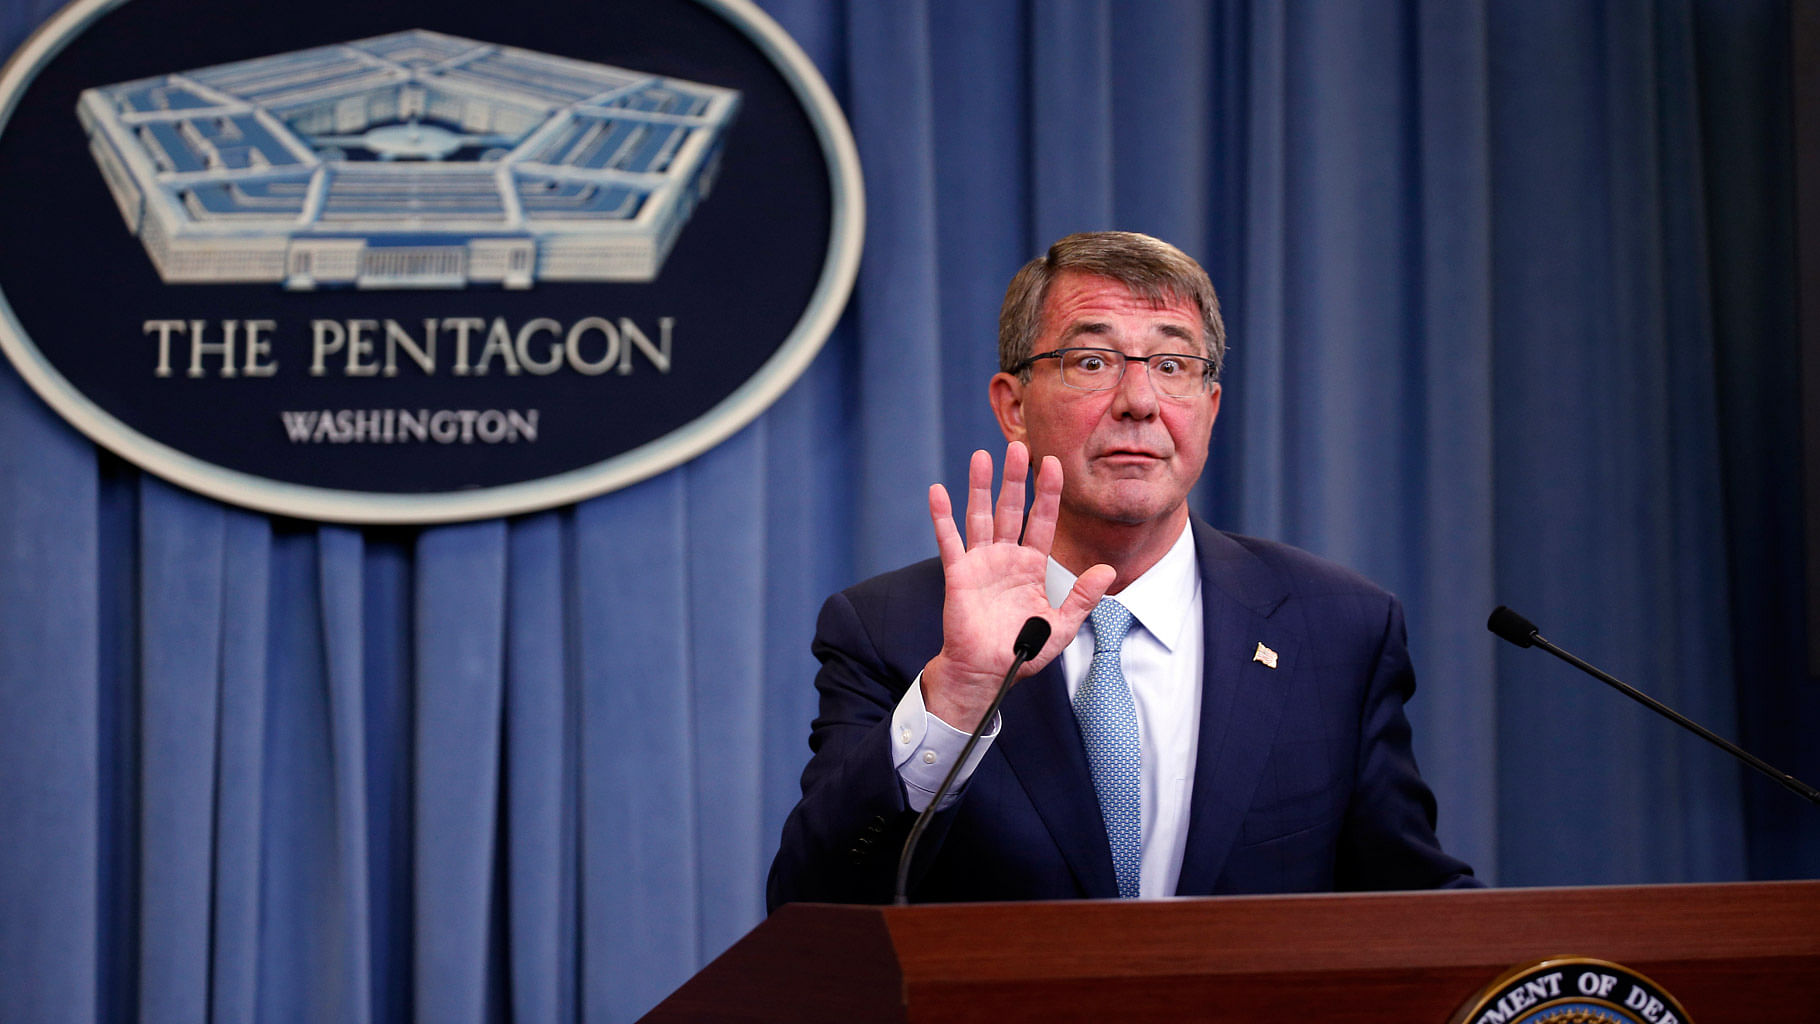 Defense Secretary Ash Carter announced new rules allowing transgender individuals to serve openly in the US military. (Photo: AP)